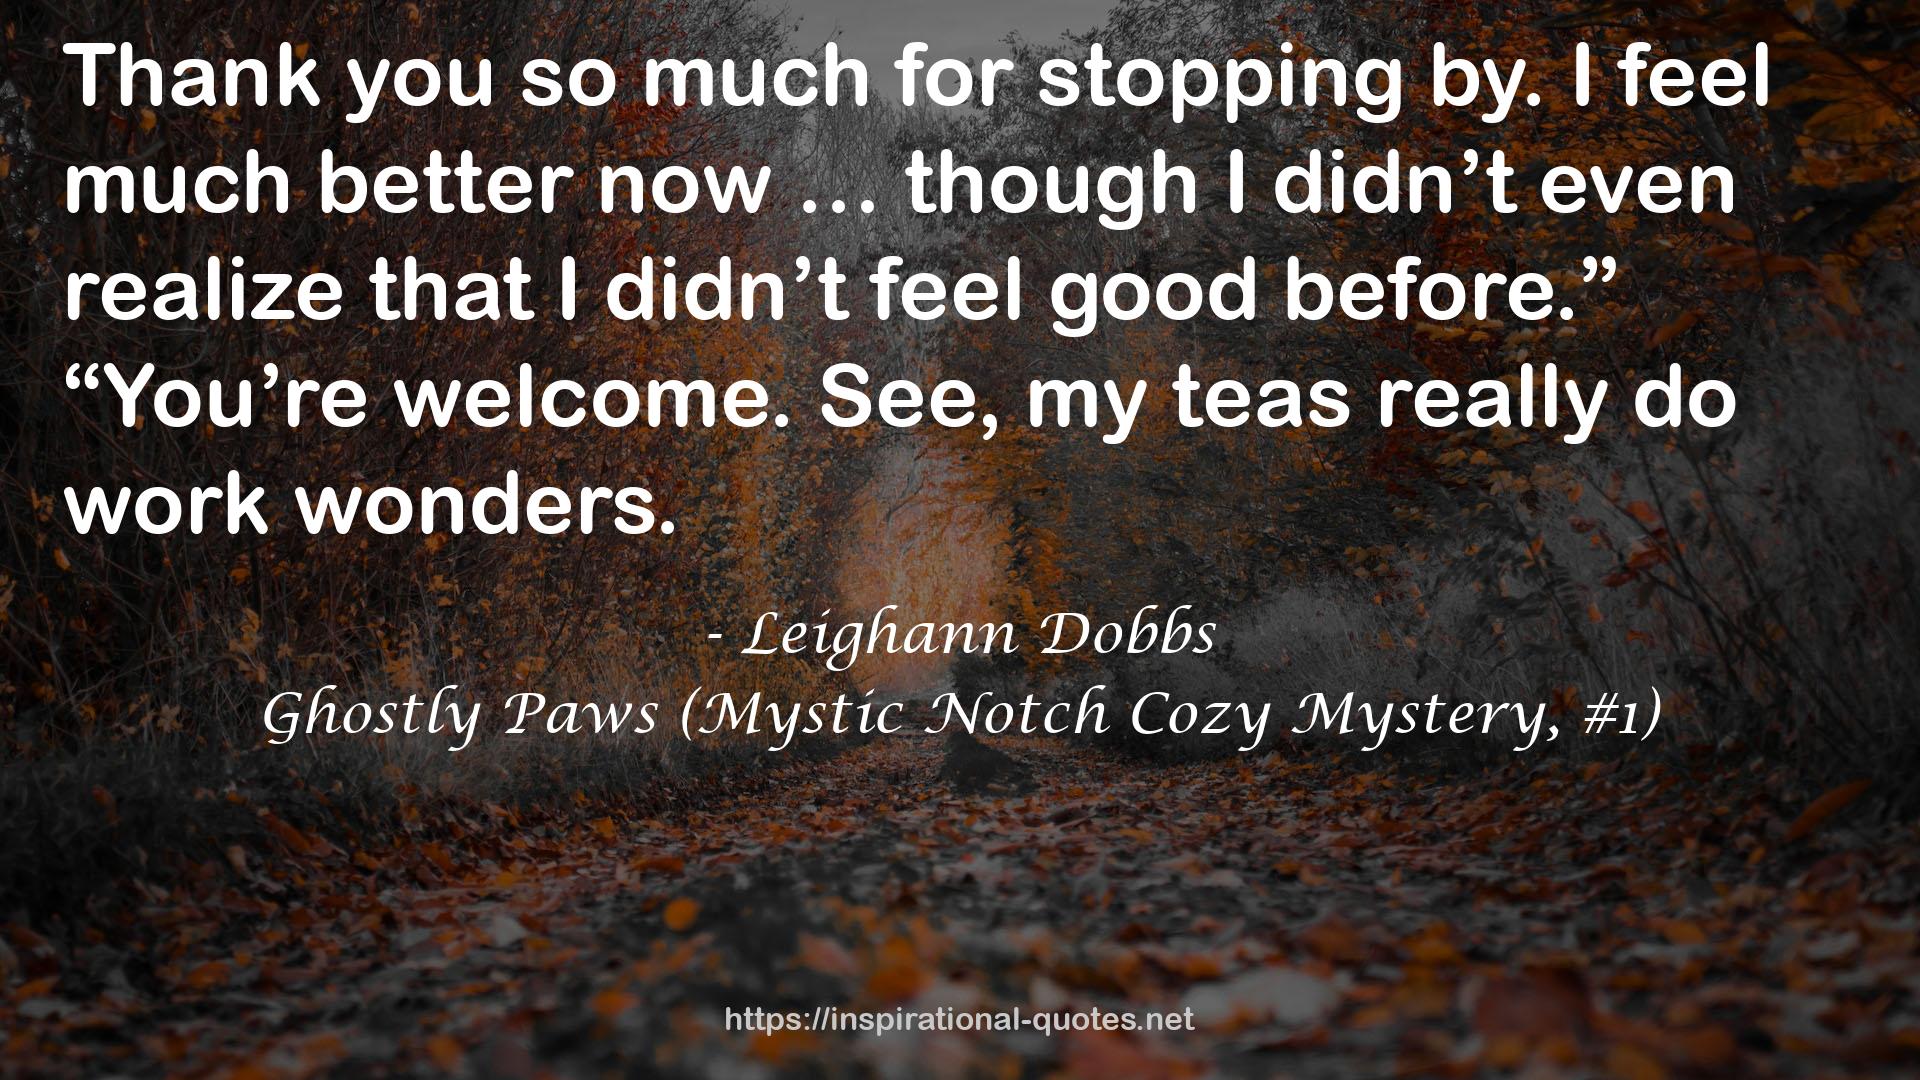 Ghostly Paws (Mystic Notch Cozy Mystery, #1) QUOTES